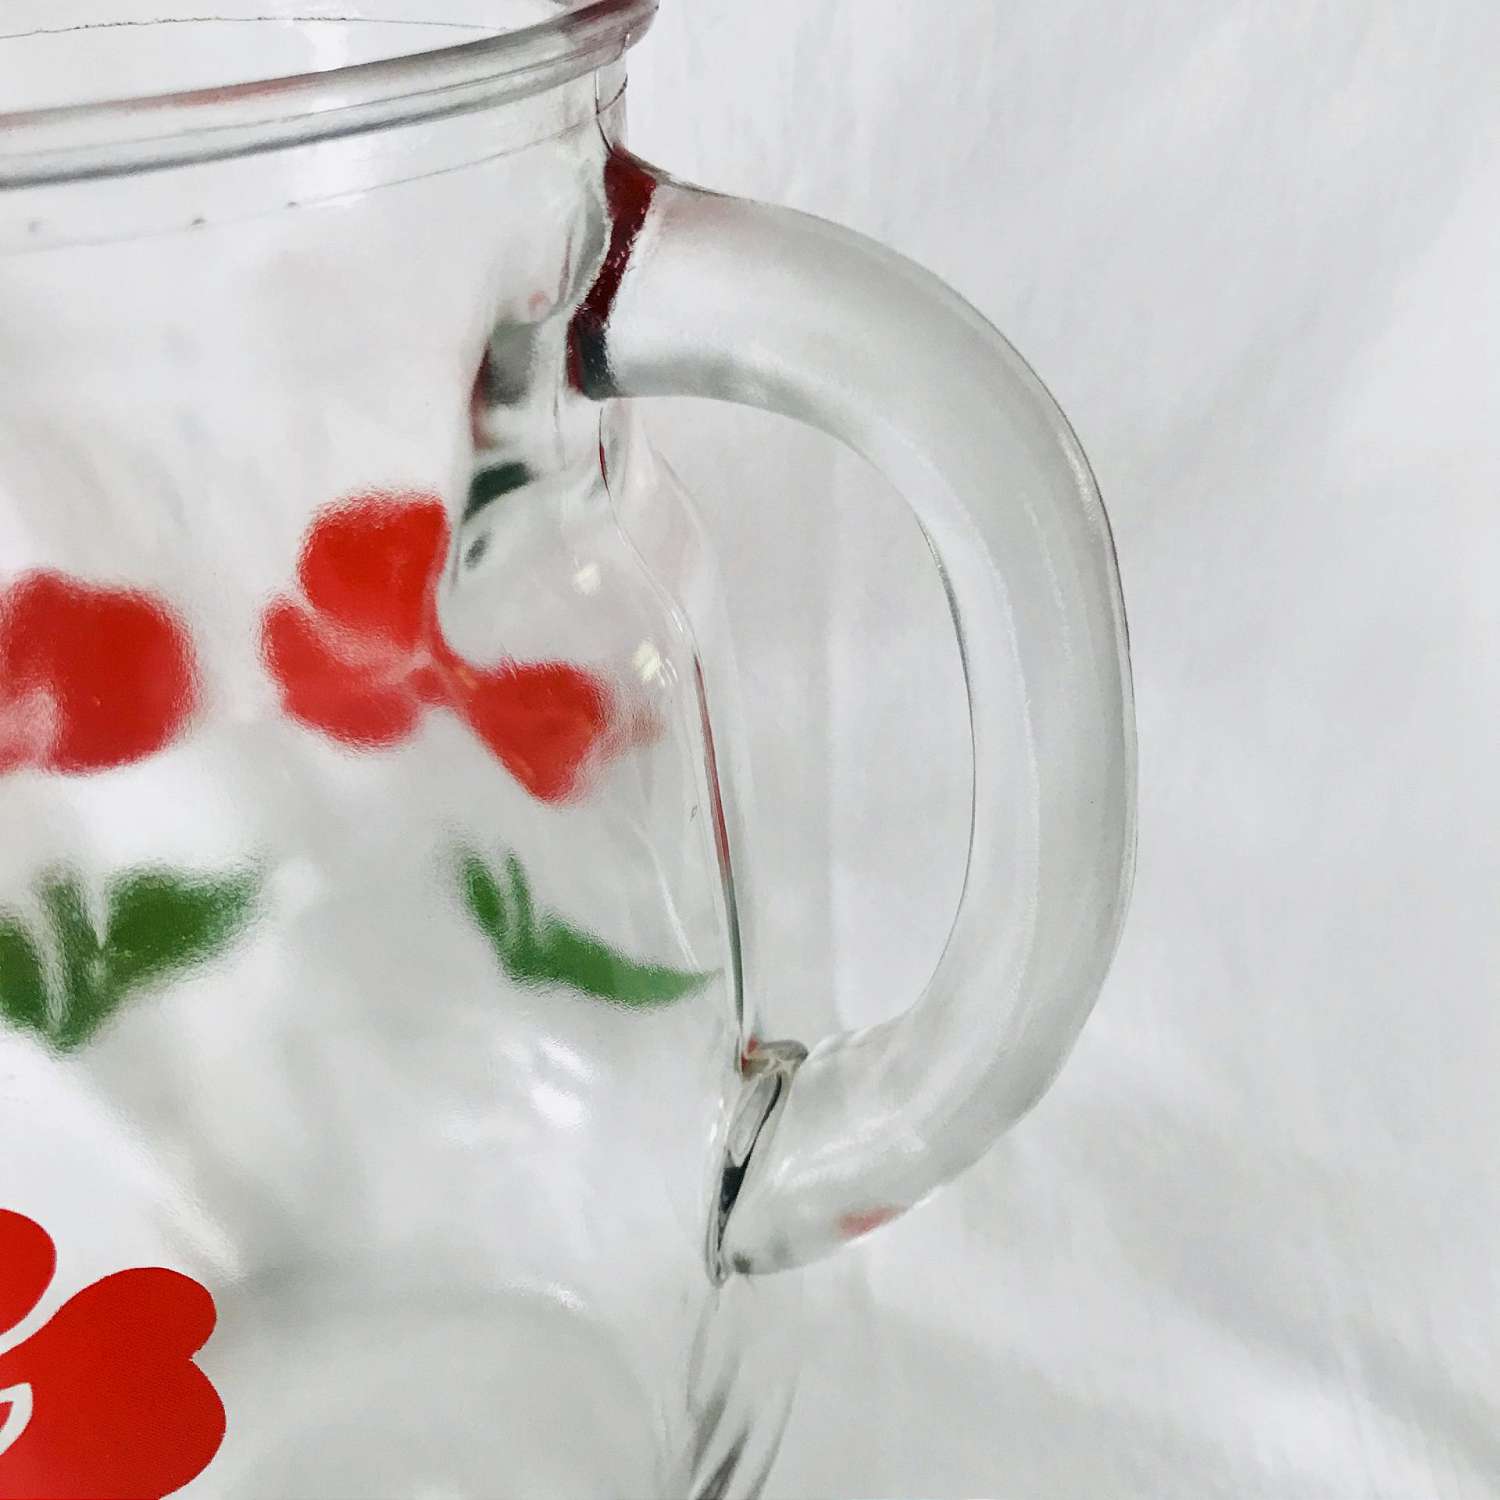 https://www.truevintageantiques.com/wp-content/uploads/2019/12/vintage-pitcher-glass-fired-on-paint-red-flowers-iced-tea-koolaid-collectible-retro-kitchen-display-farmhouse-summer-picnic-patio-water-5df9536f2-scaled.jpg